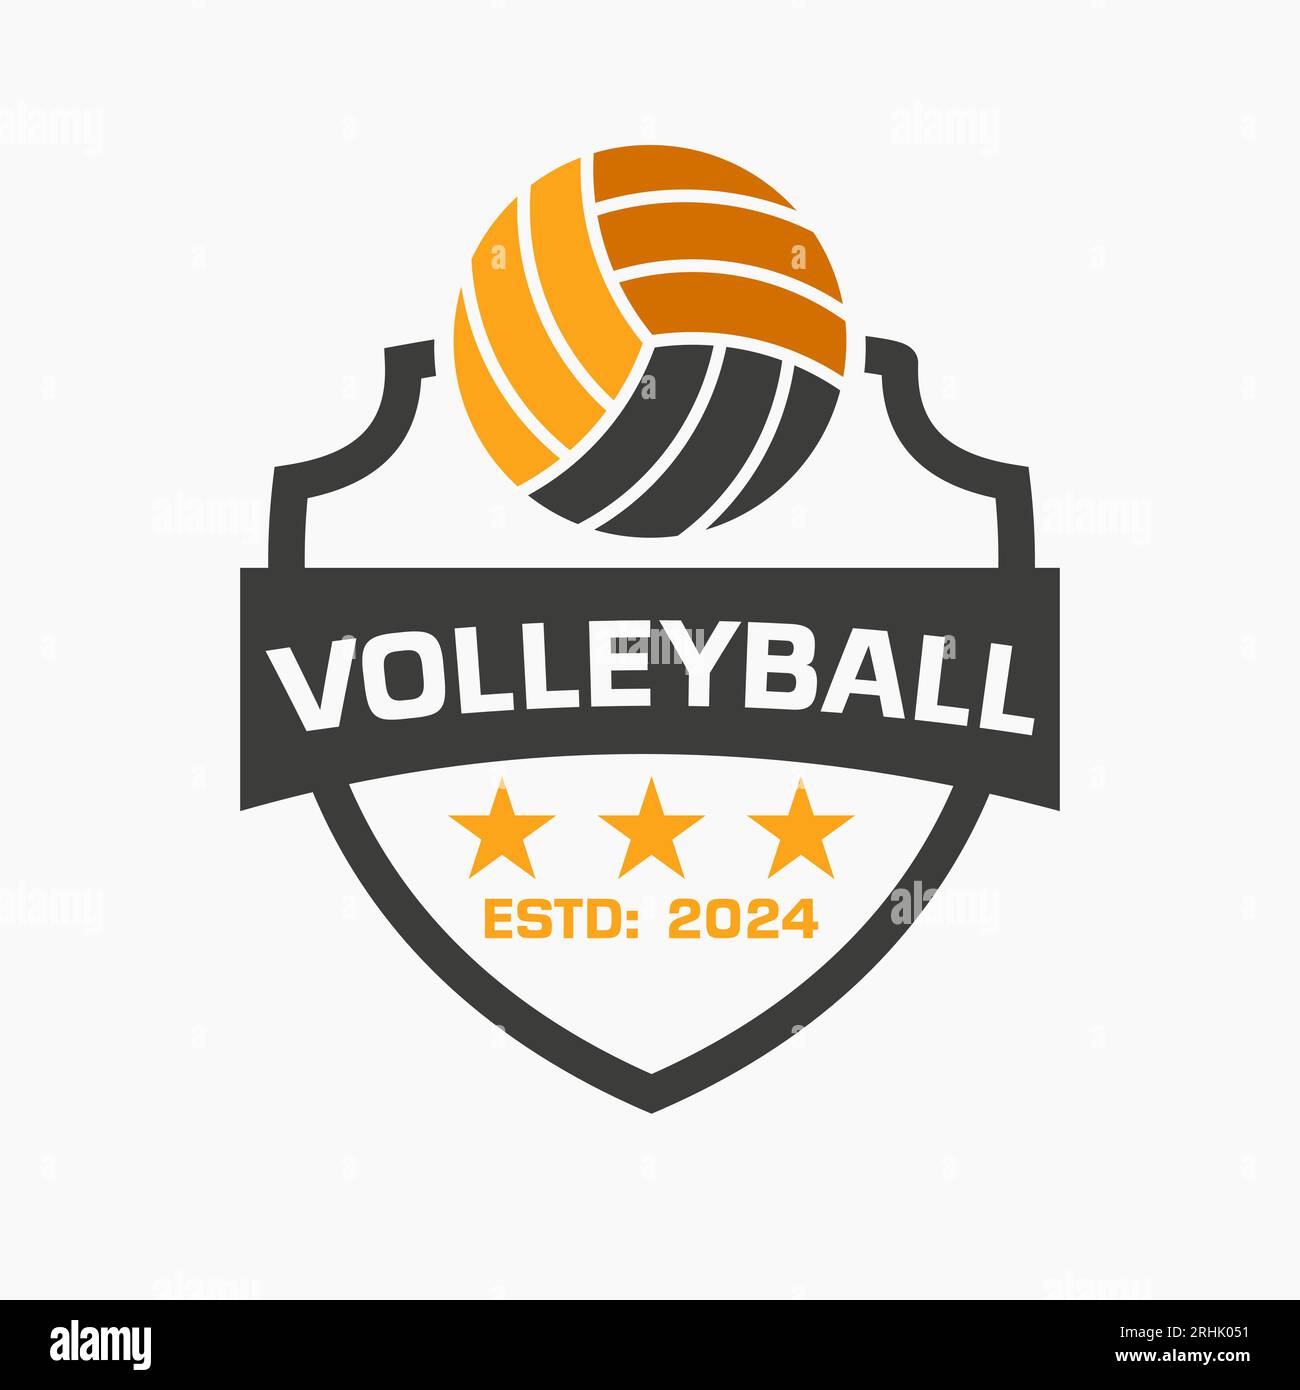 Volley Ball Logo Concept With Shield and Volleyball Symbol Stock Vector ...